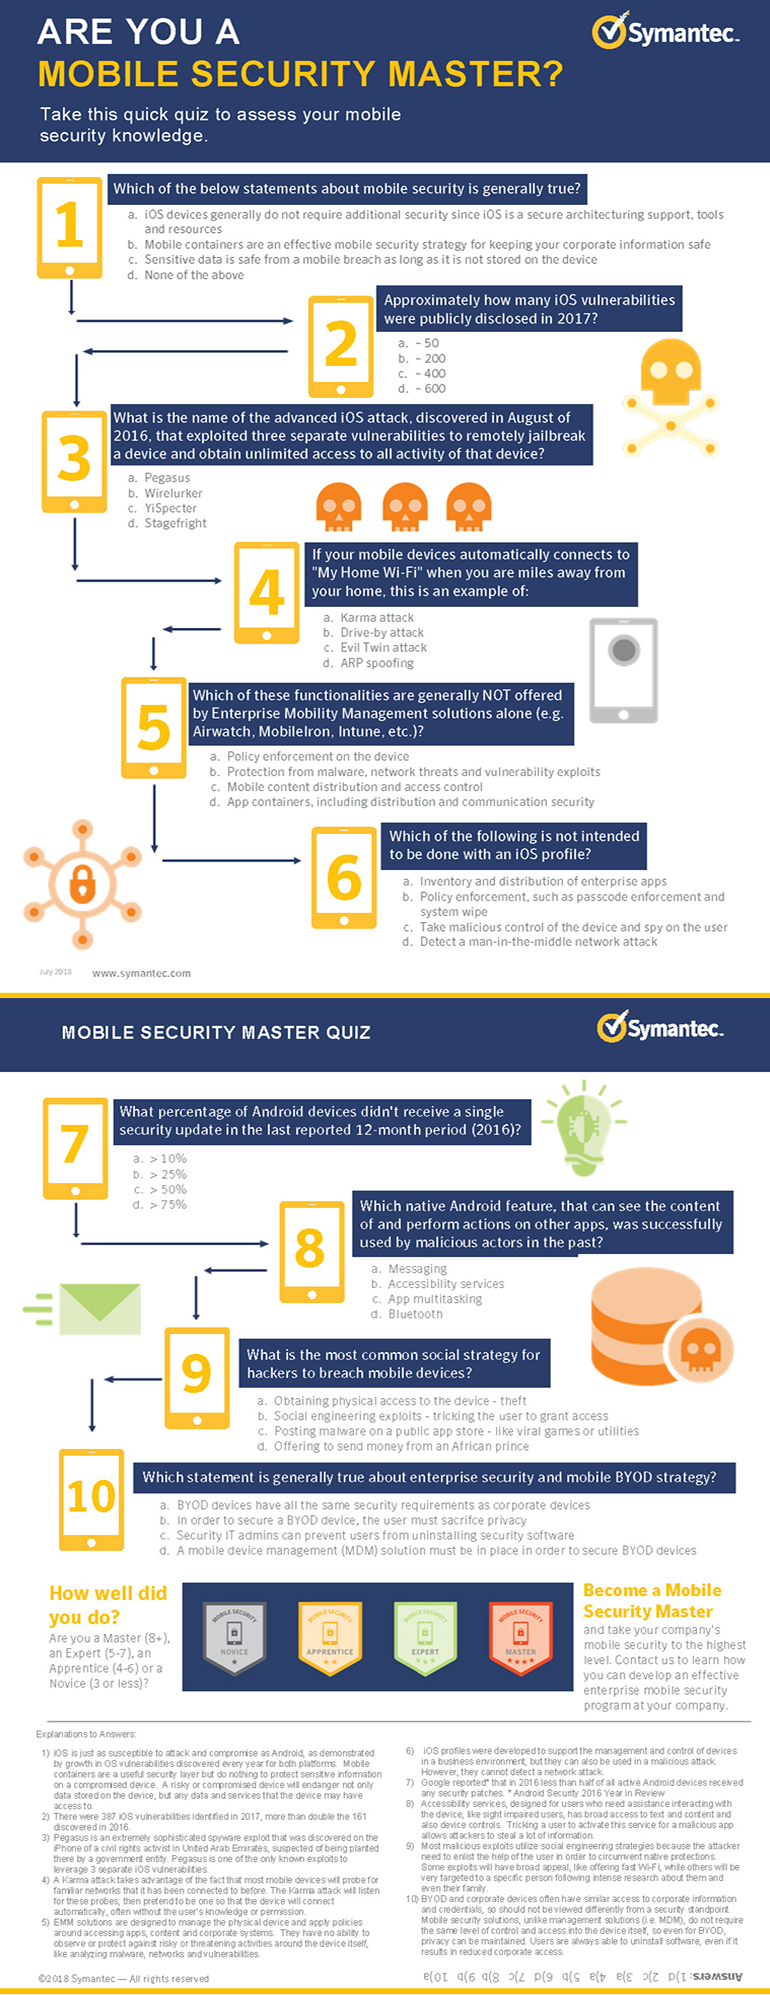 Are You a Mobile Security Master infographic